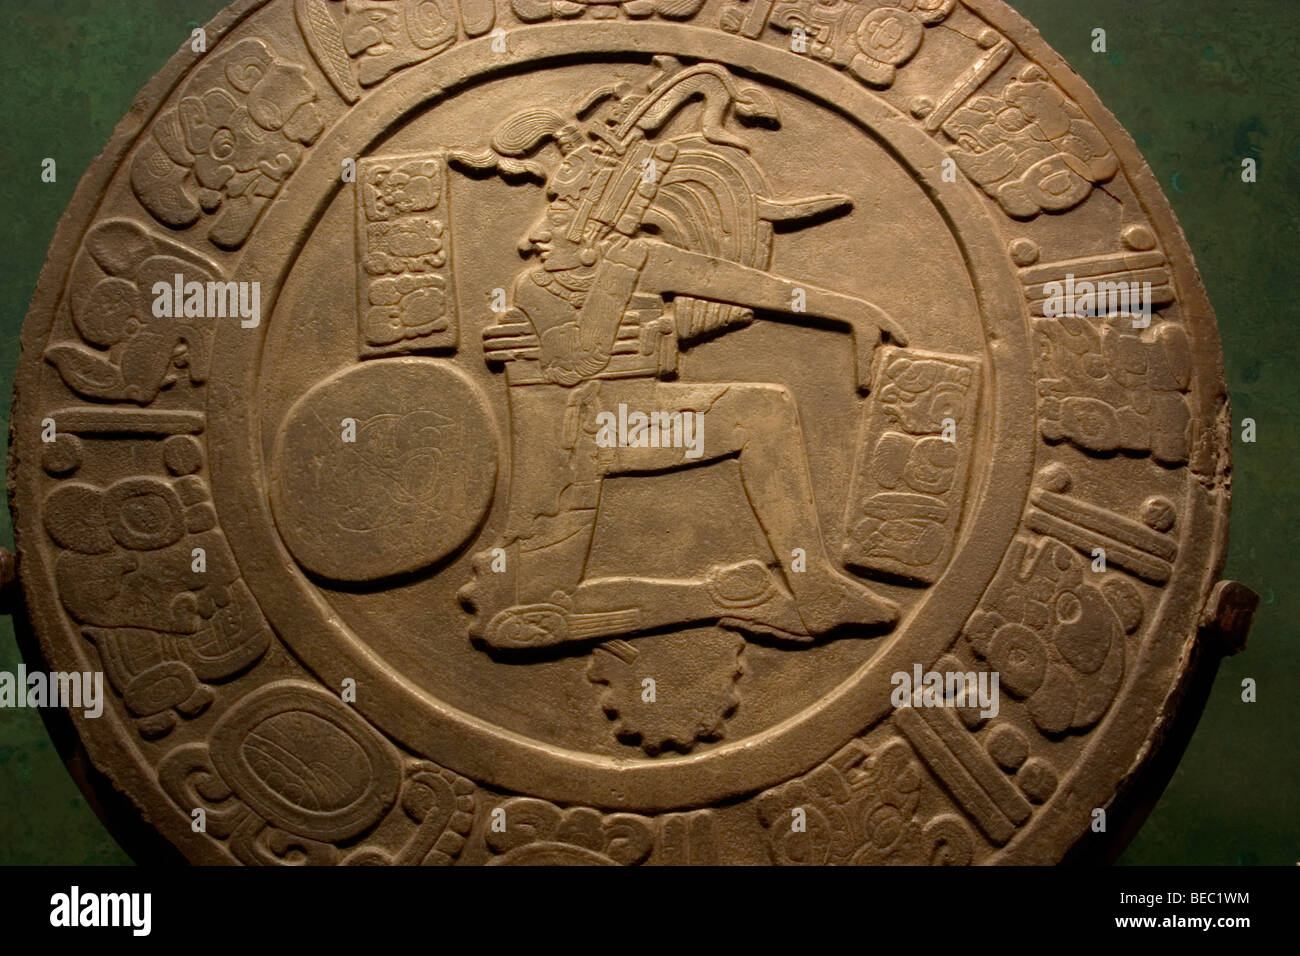 Mayan ballgame marker from the Maya site of Chinkultic, Chiapas, now in ...